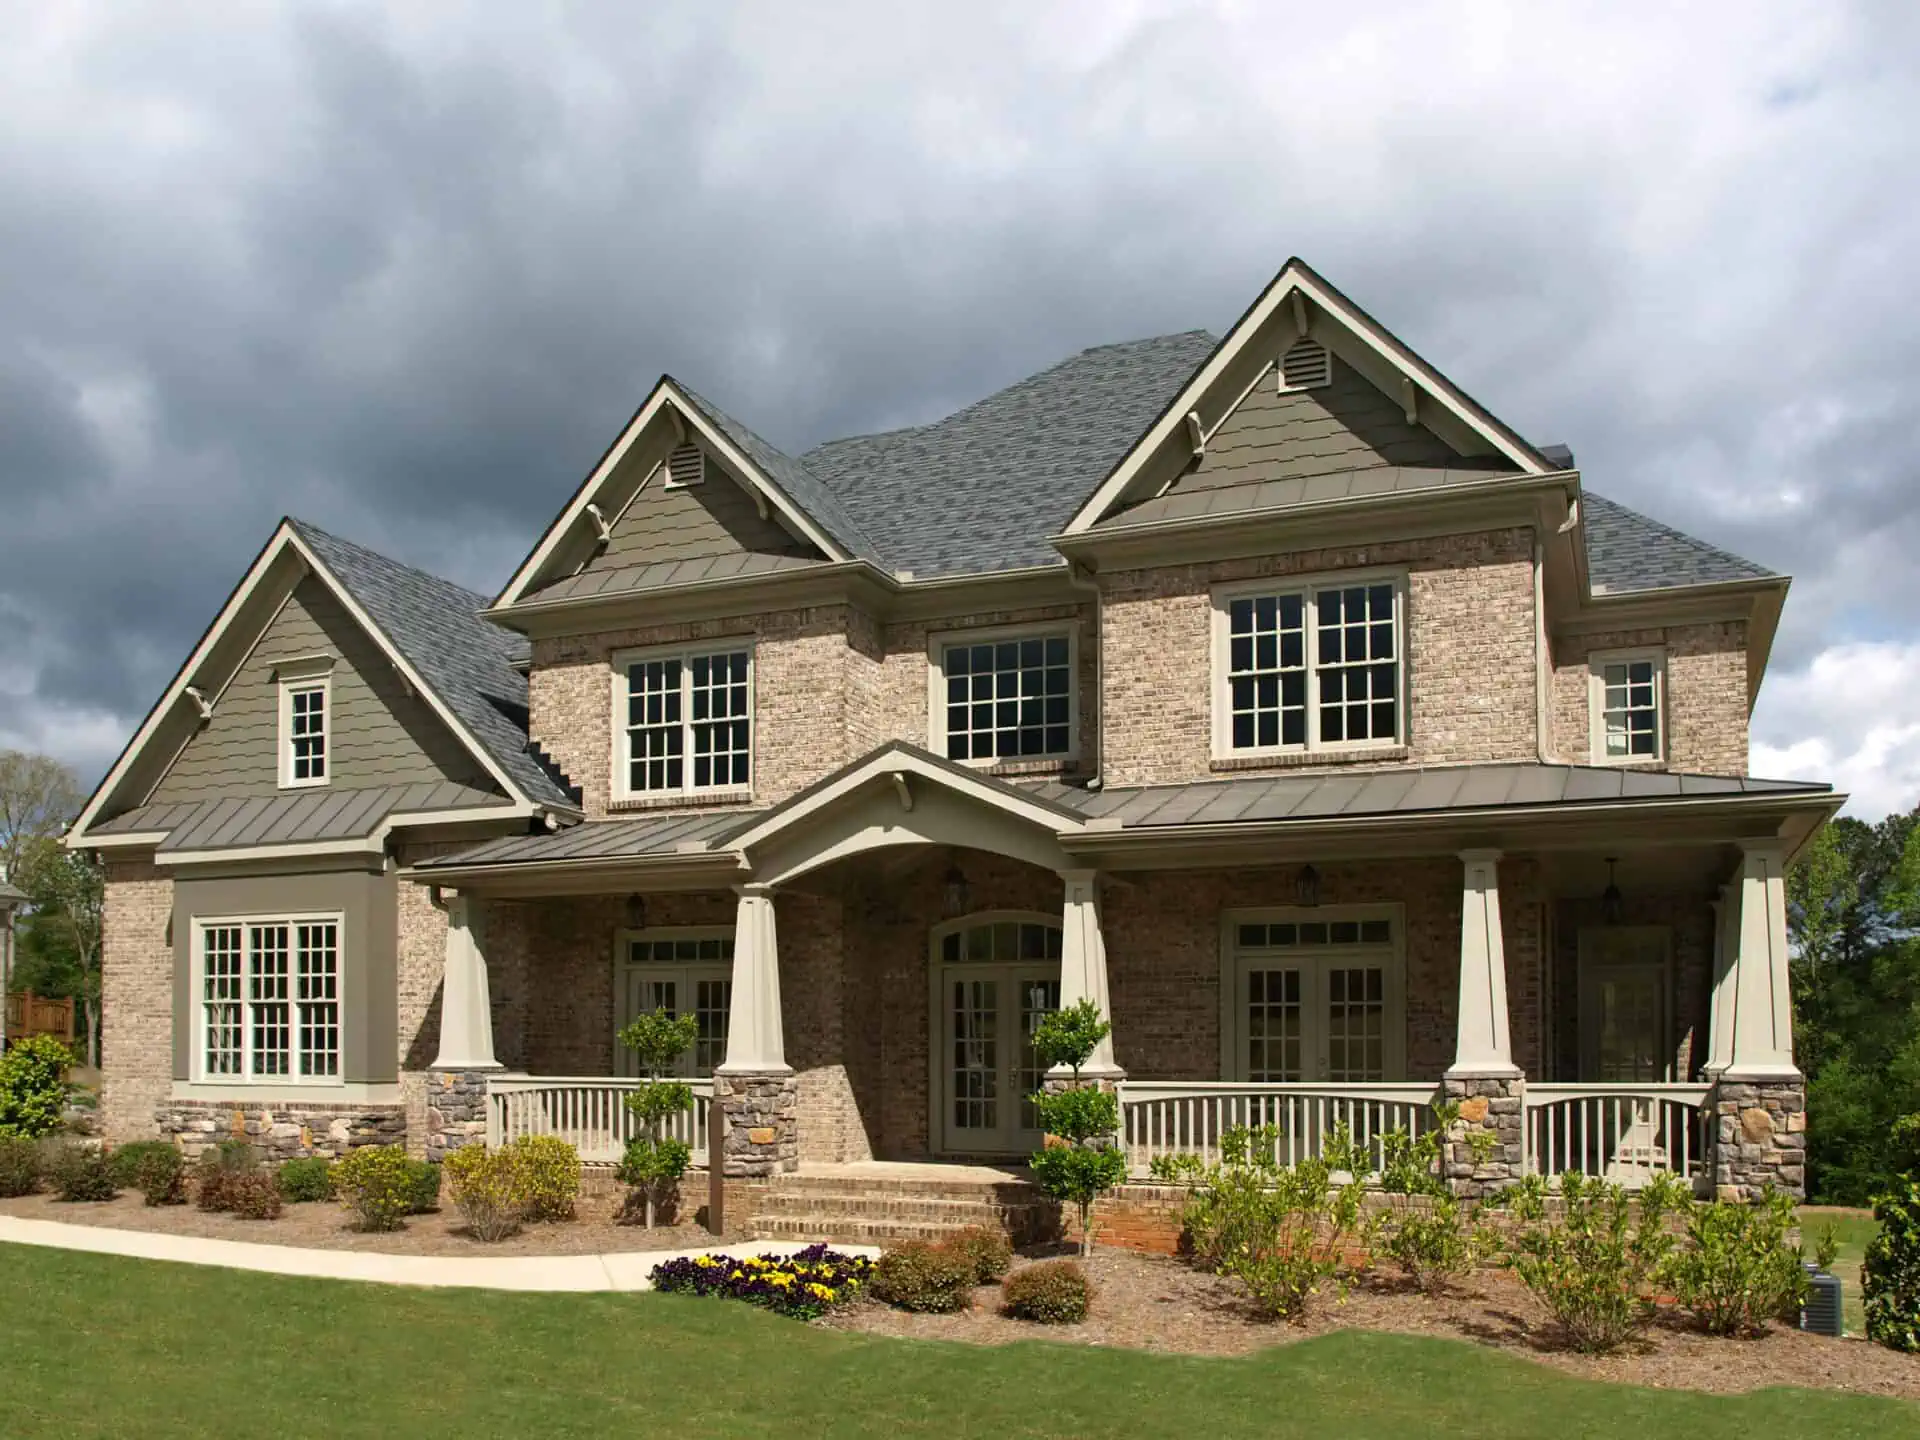 Luxury Model Home Exterior Stormy Weather